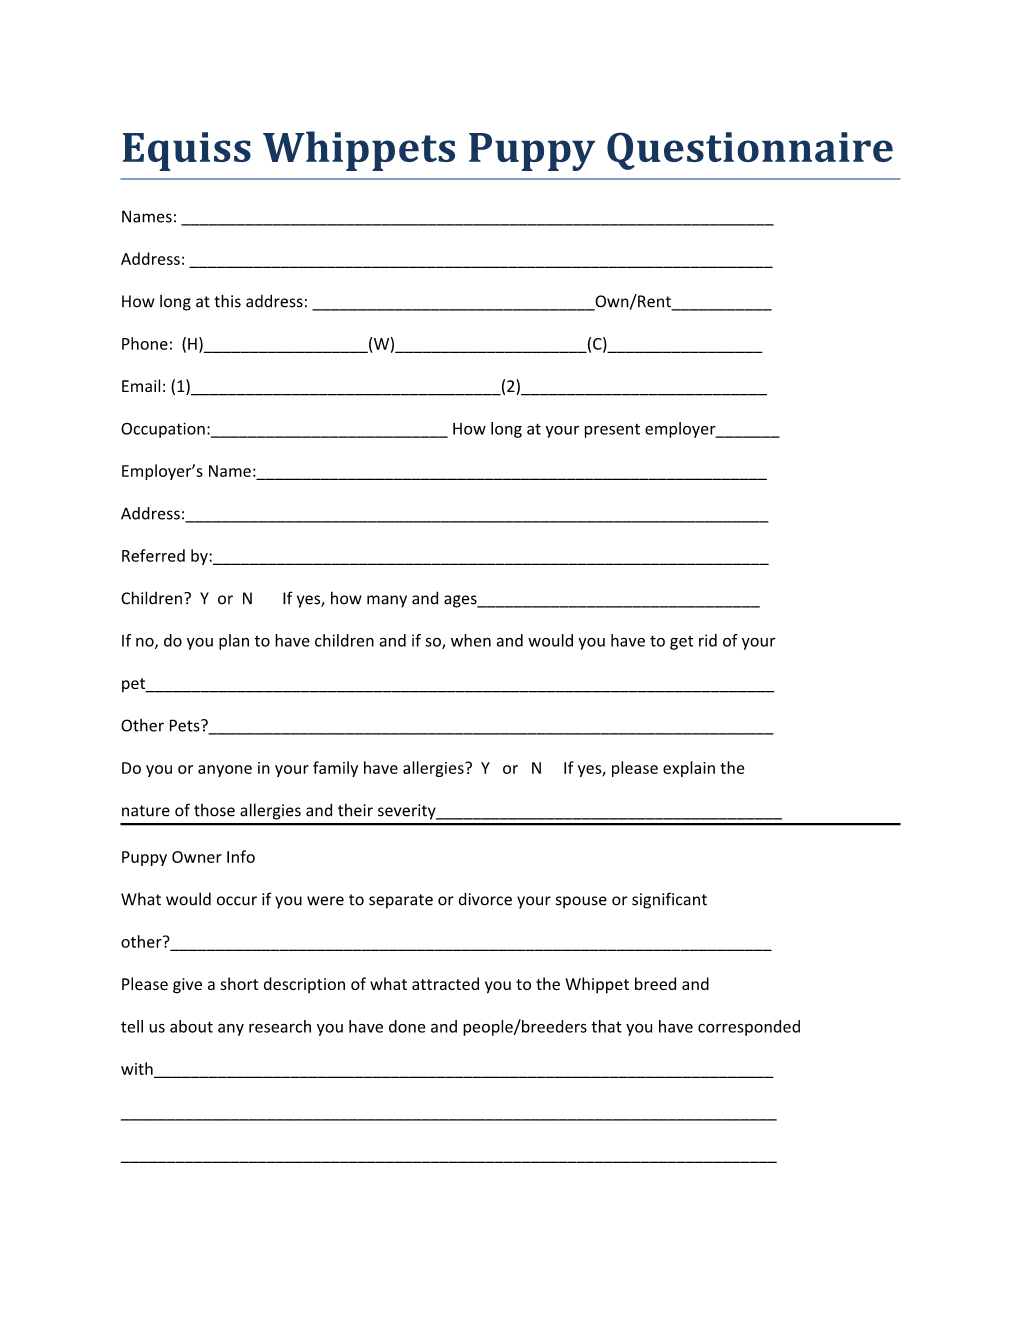 Equiss Whippets Puppy Questionnaire